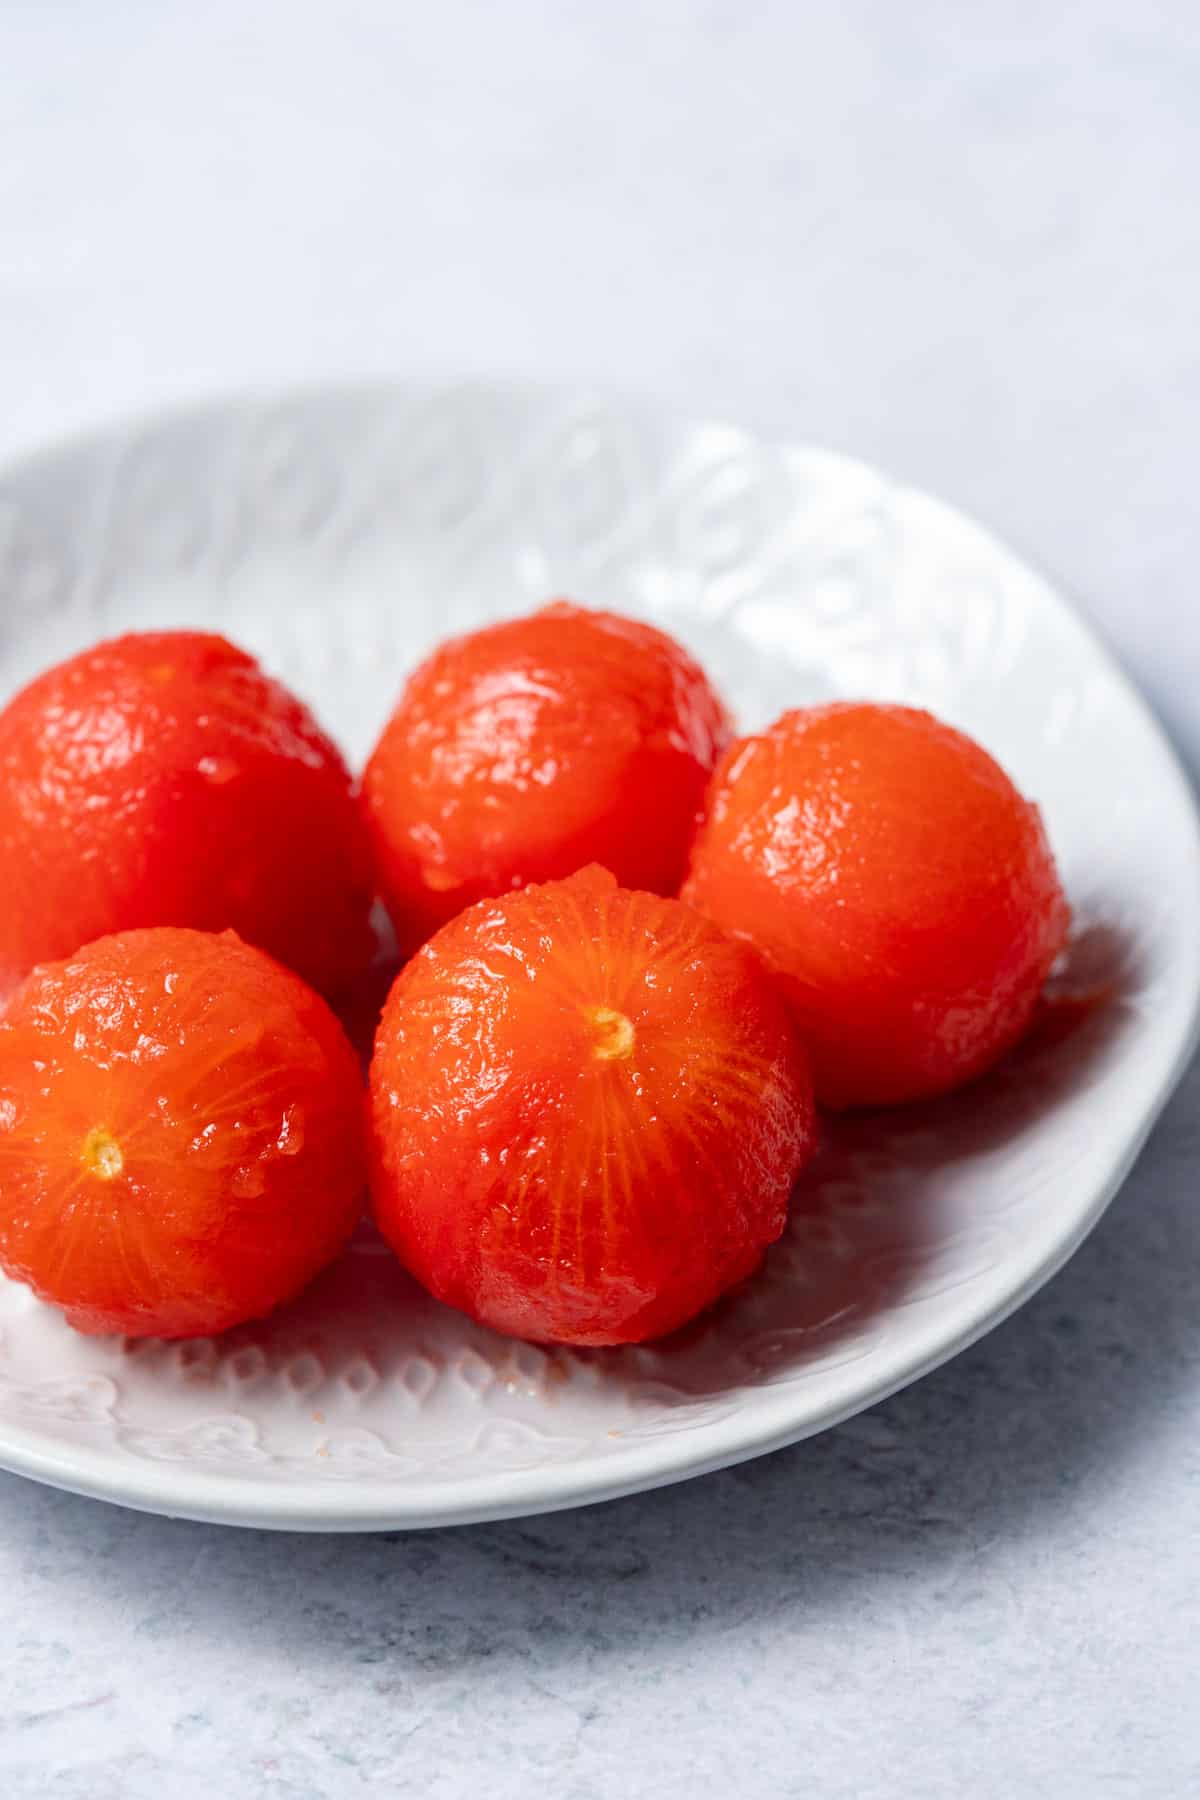 image of 5 peeled tomatoes on a white plate